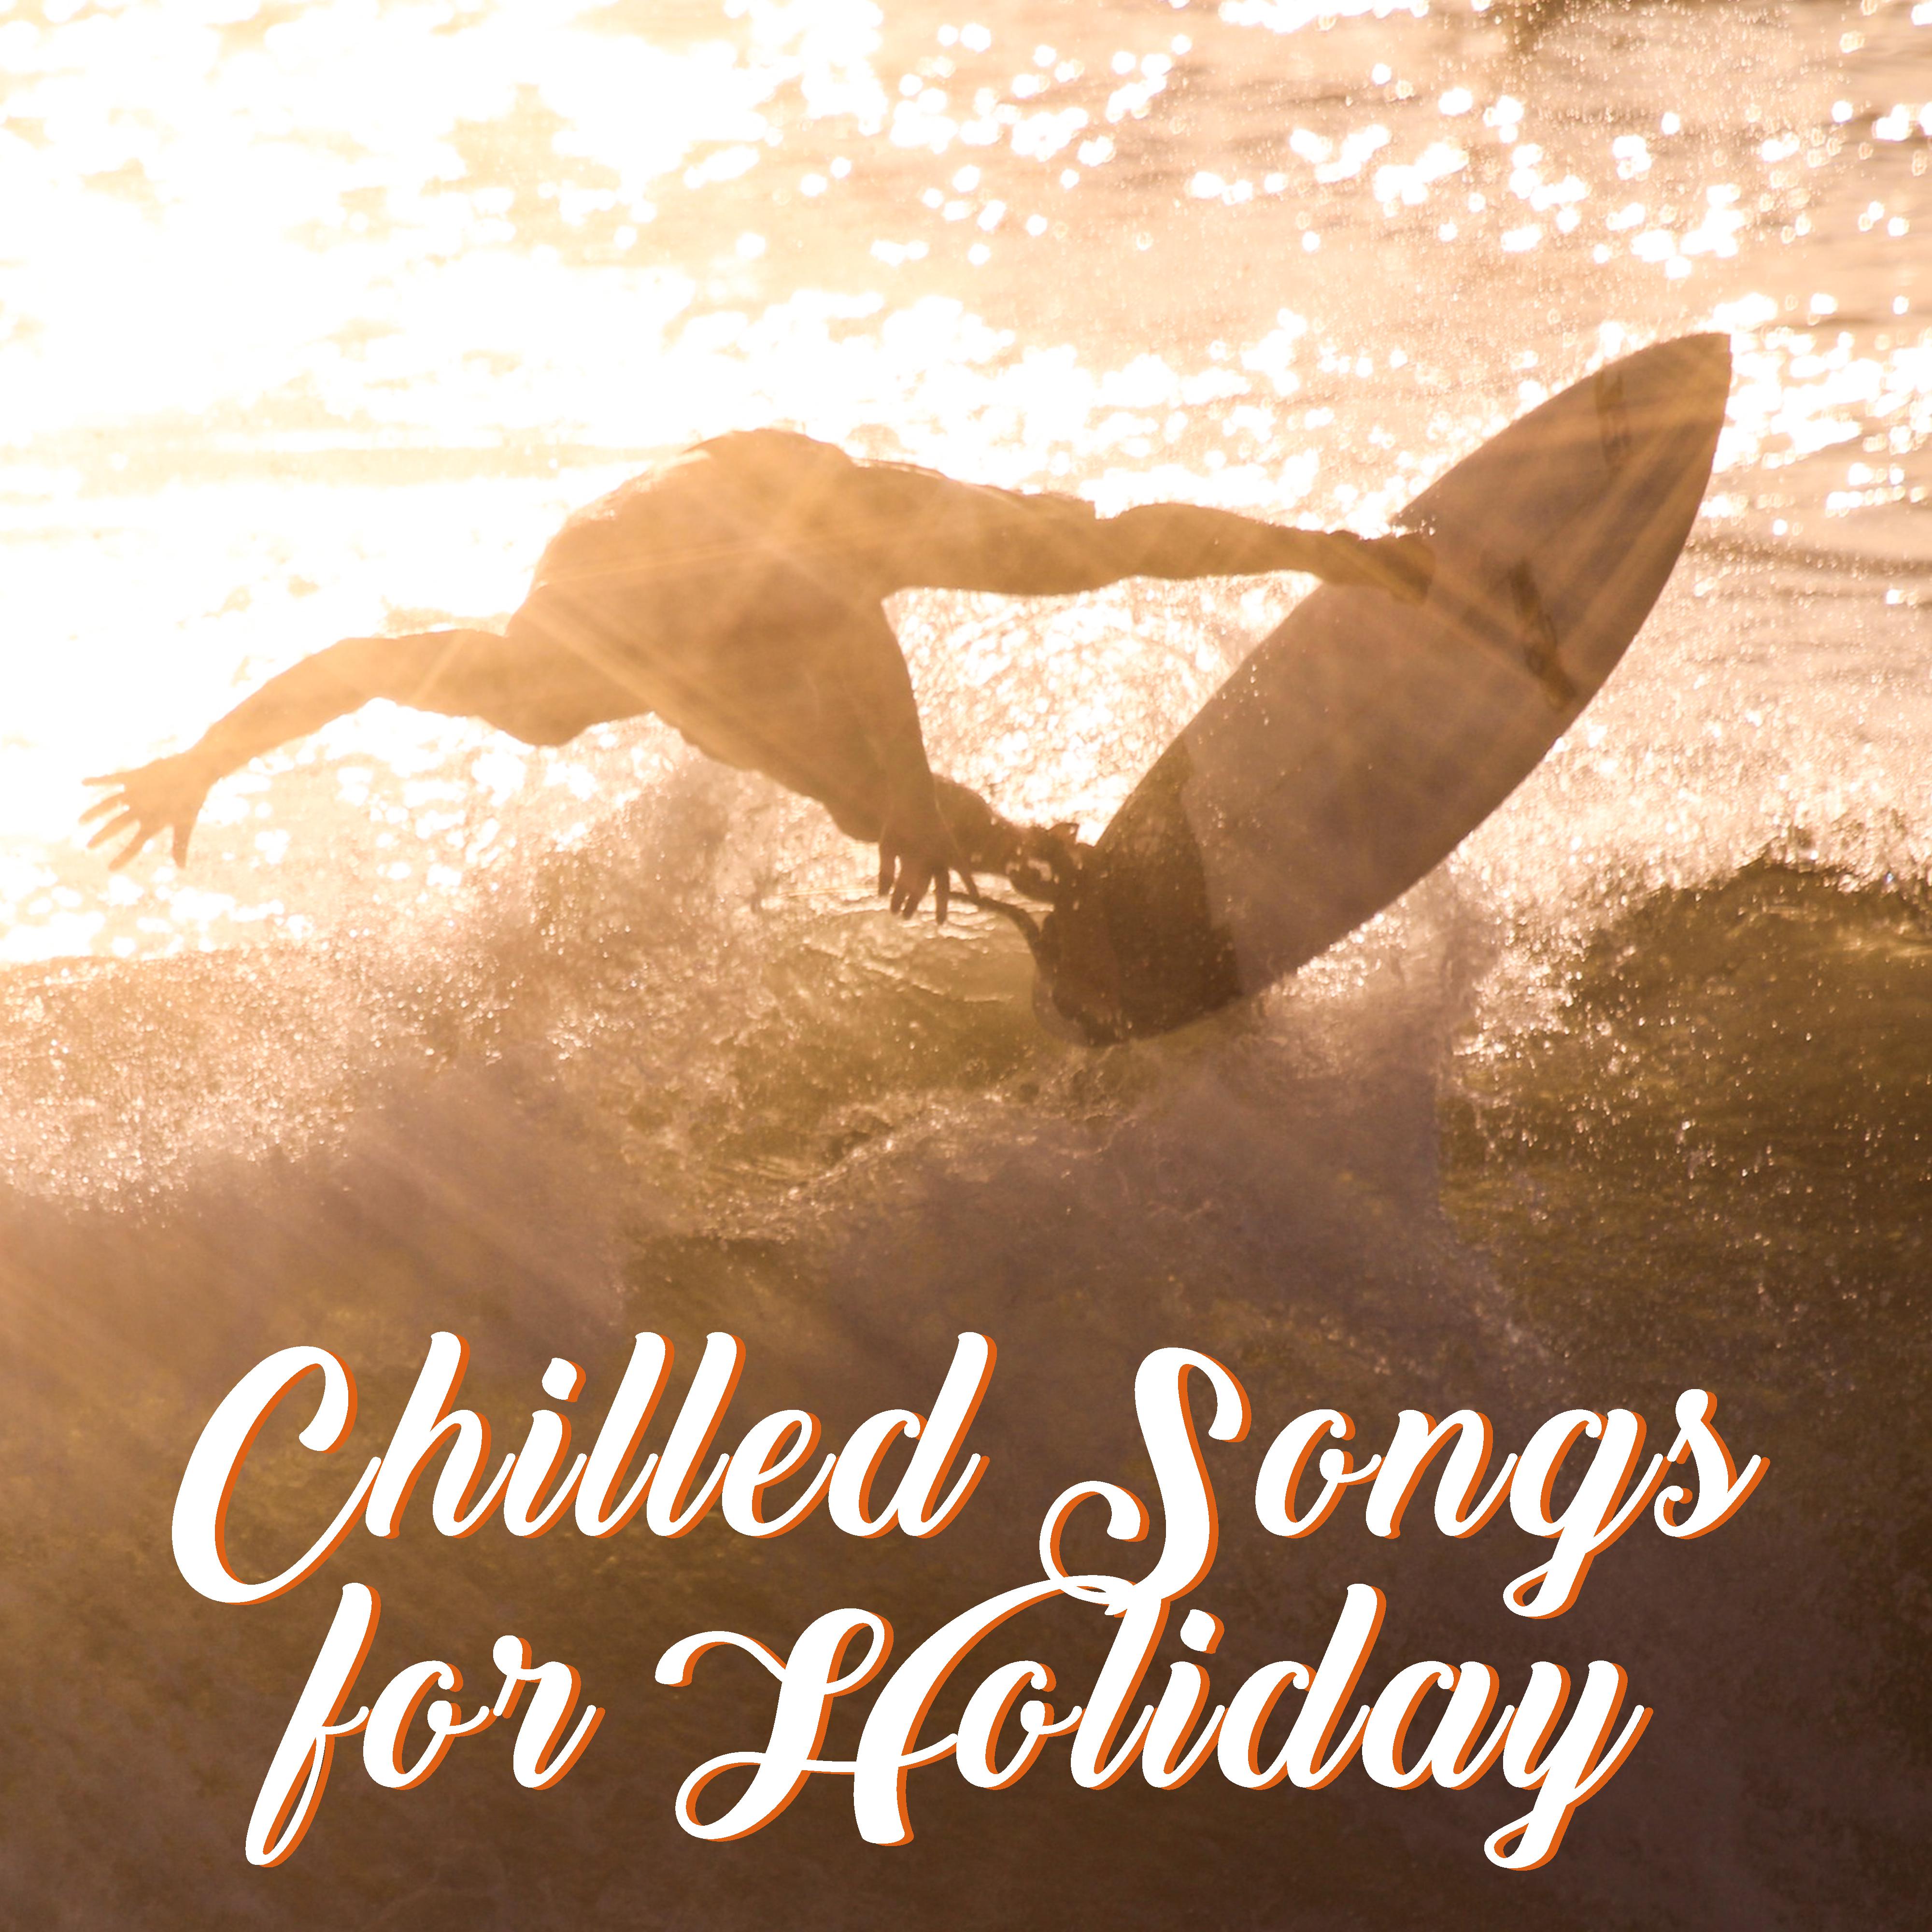 Chilled Songs for Holiday – Chill Out Beats, Tropical Island Rest, Easy Listening, Summer Songs